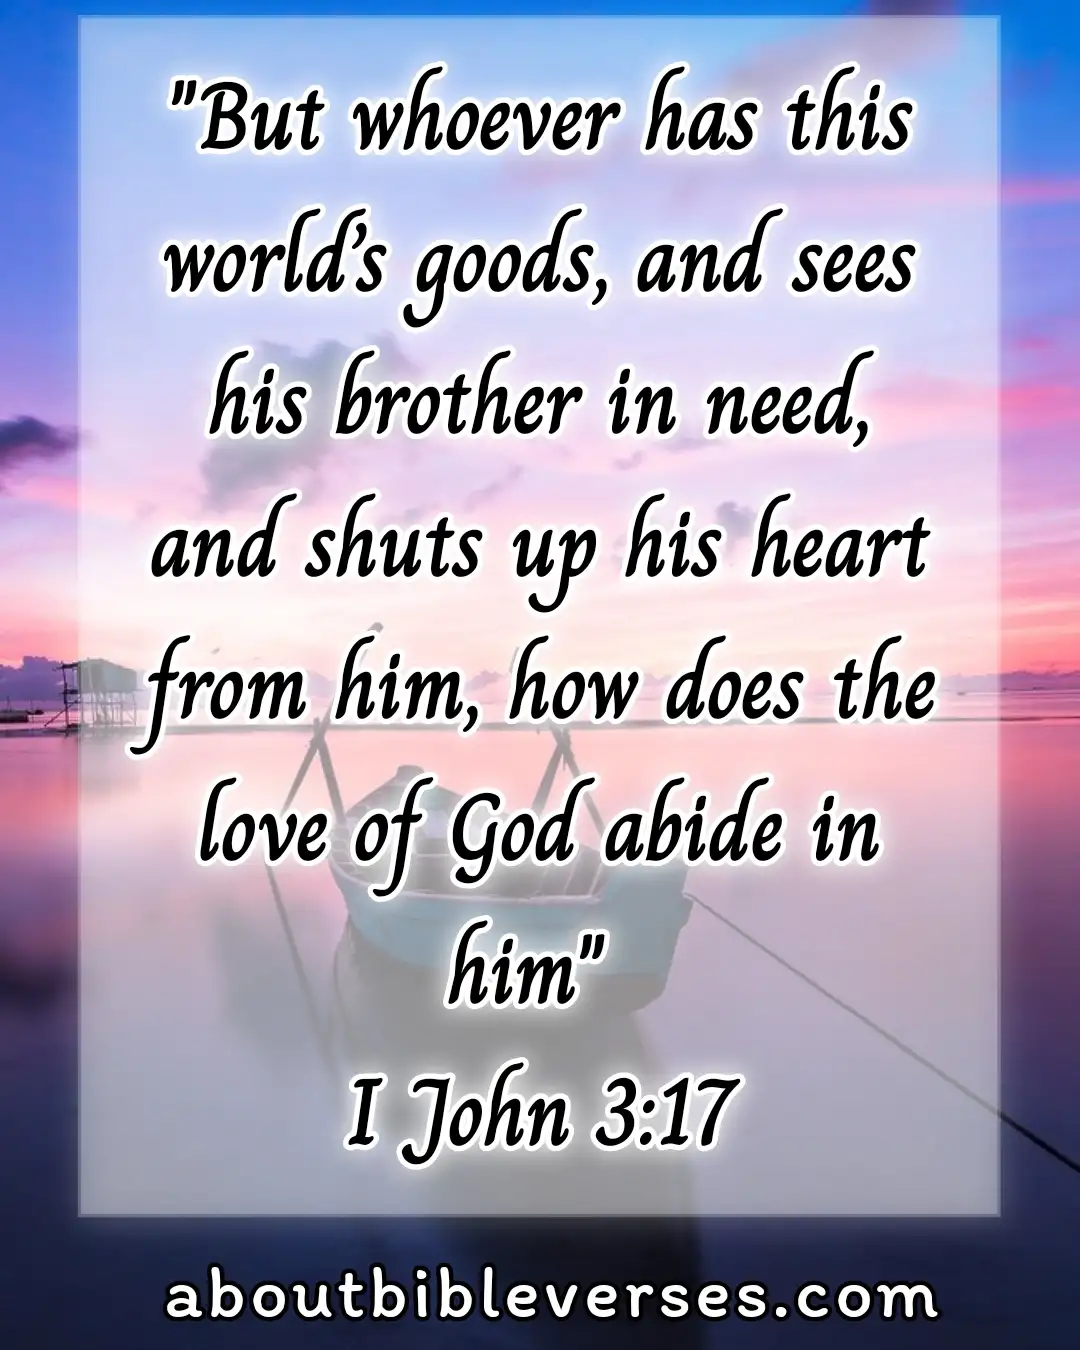 bible verses about benefits of giving alms (1 John 3:17)